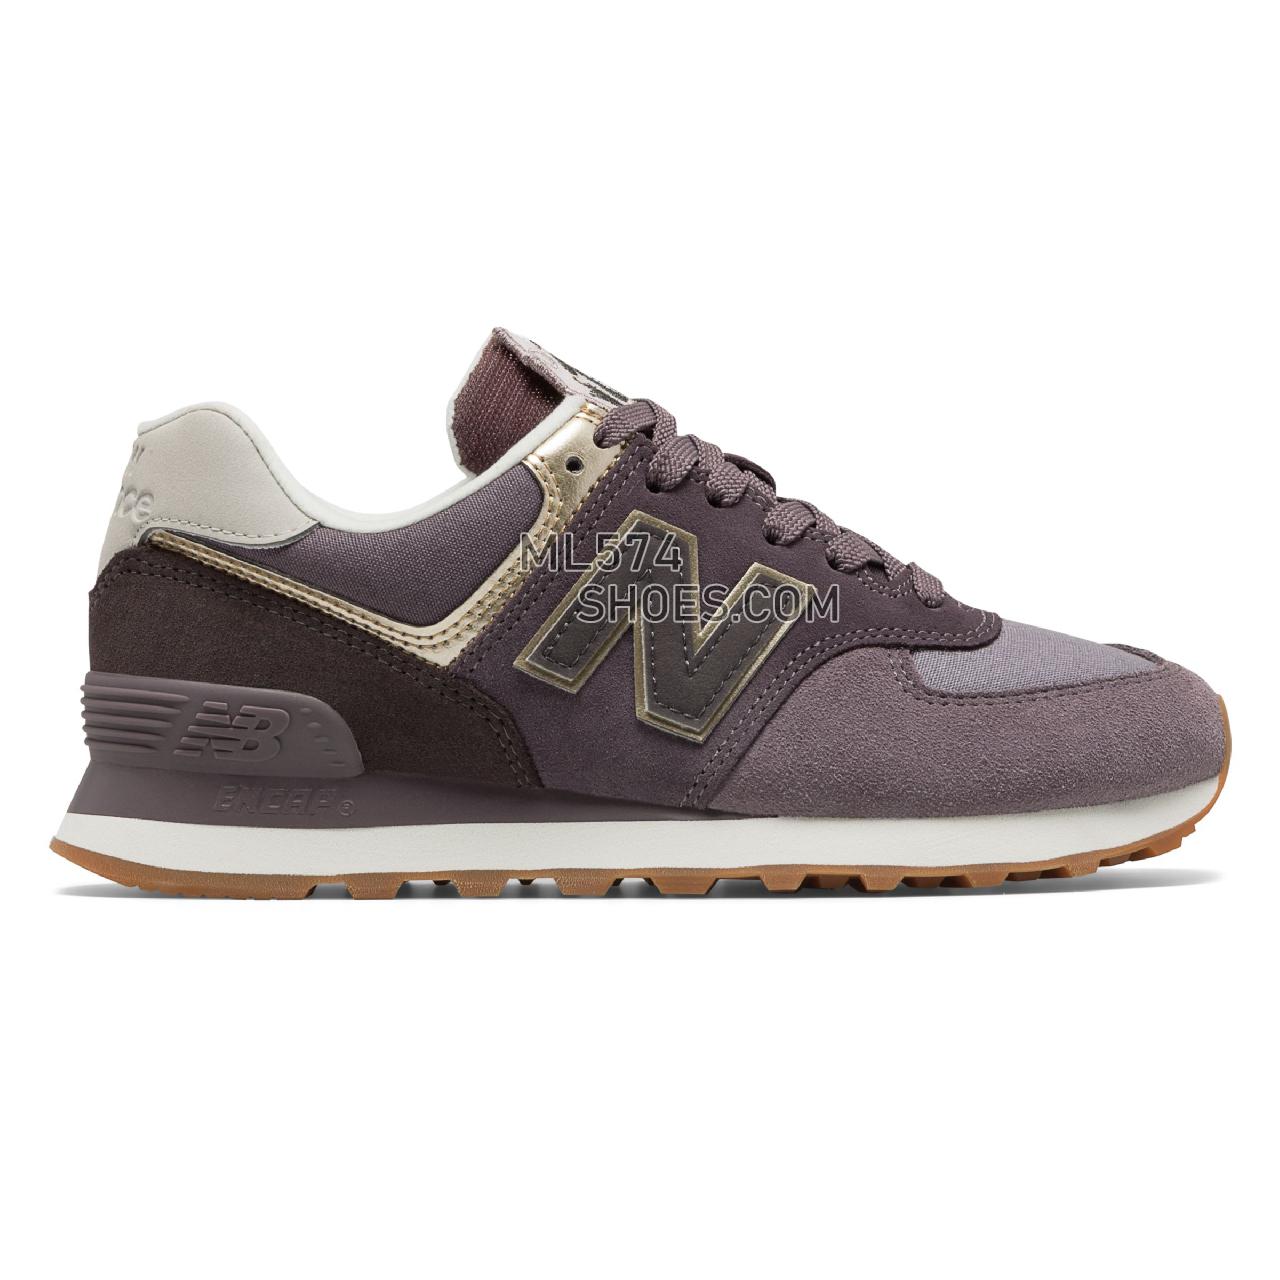 New Balance 574 Metallic Patch - Women's Classic Sneakers - Dark Cashmere with Light Gold - WL574MLB